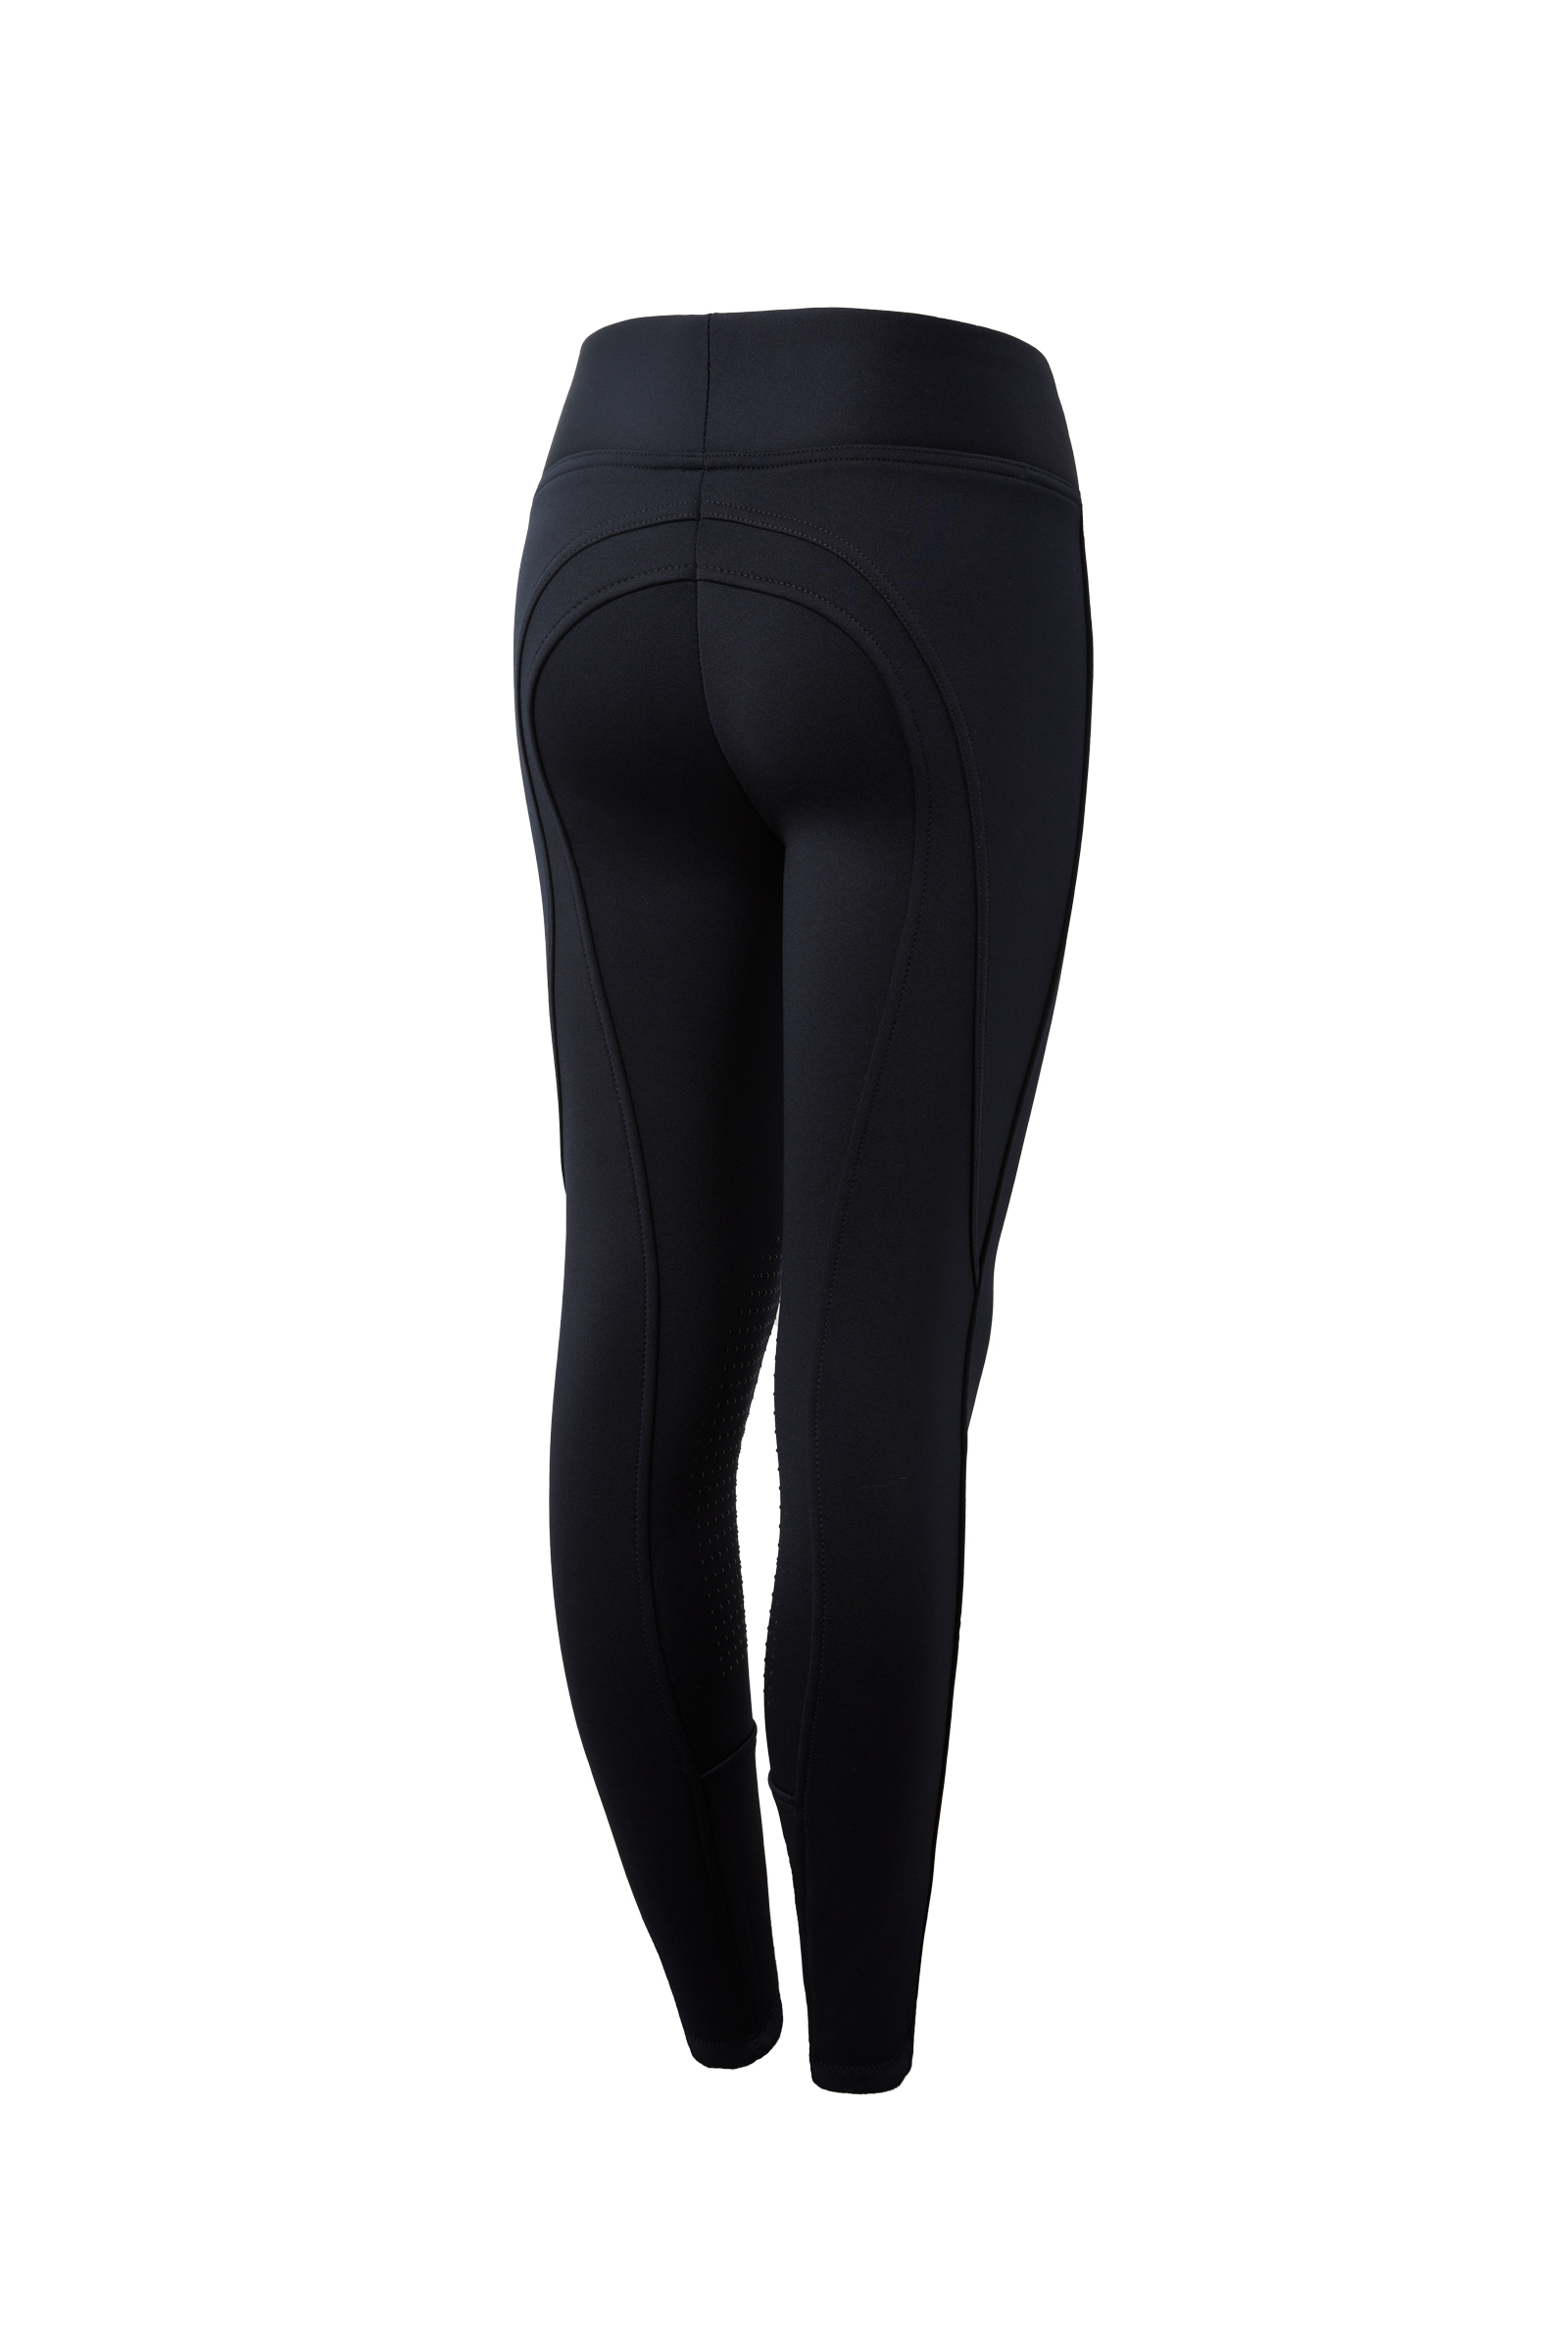 Buy Horze Leighton Teens Silicone Full Grip Riding Tights with Warm Lining